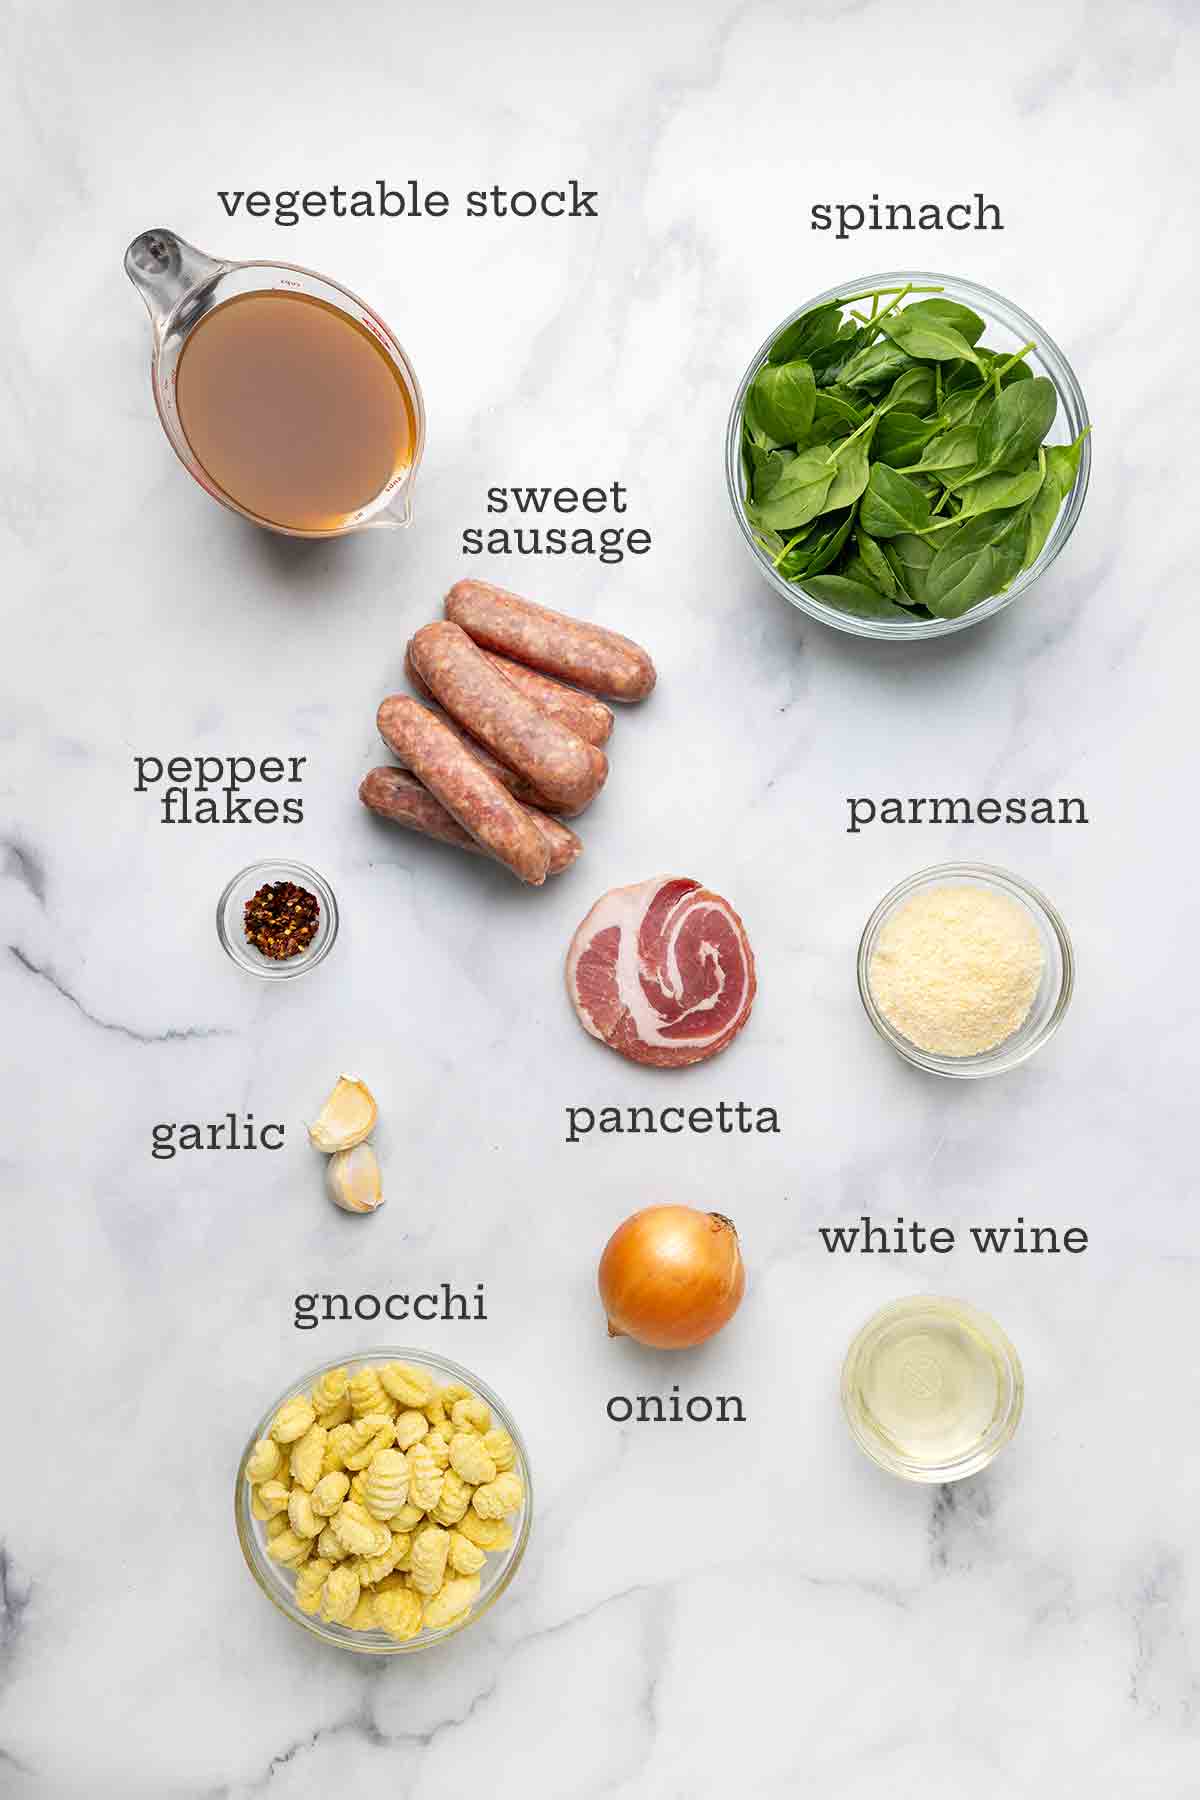 Ingredients for Italian sausage soup--stock, spinach, sausage, pepper flakes, pancetta, parmesan, onion, gnocchi, white wine, and garlic.